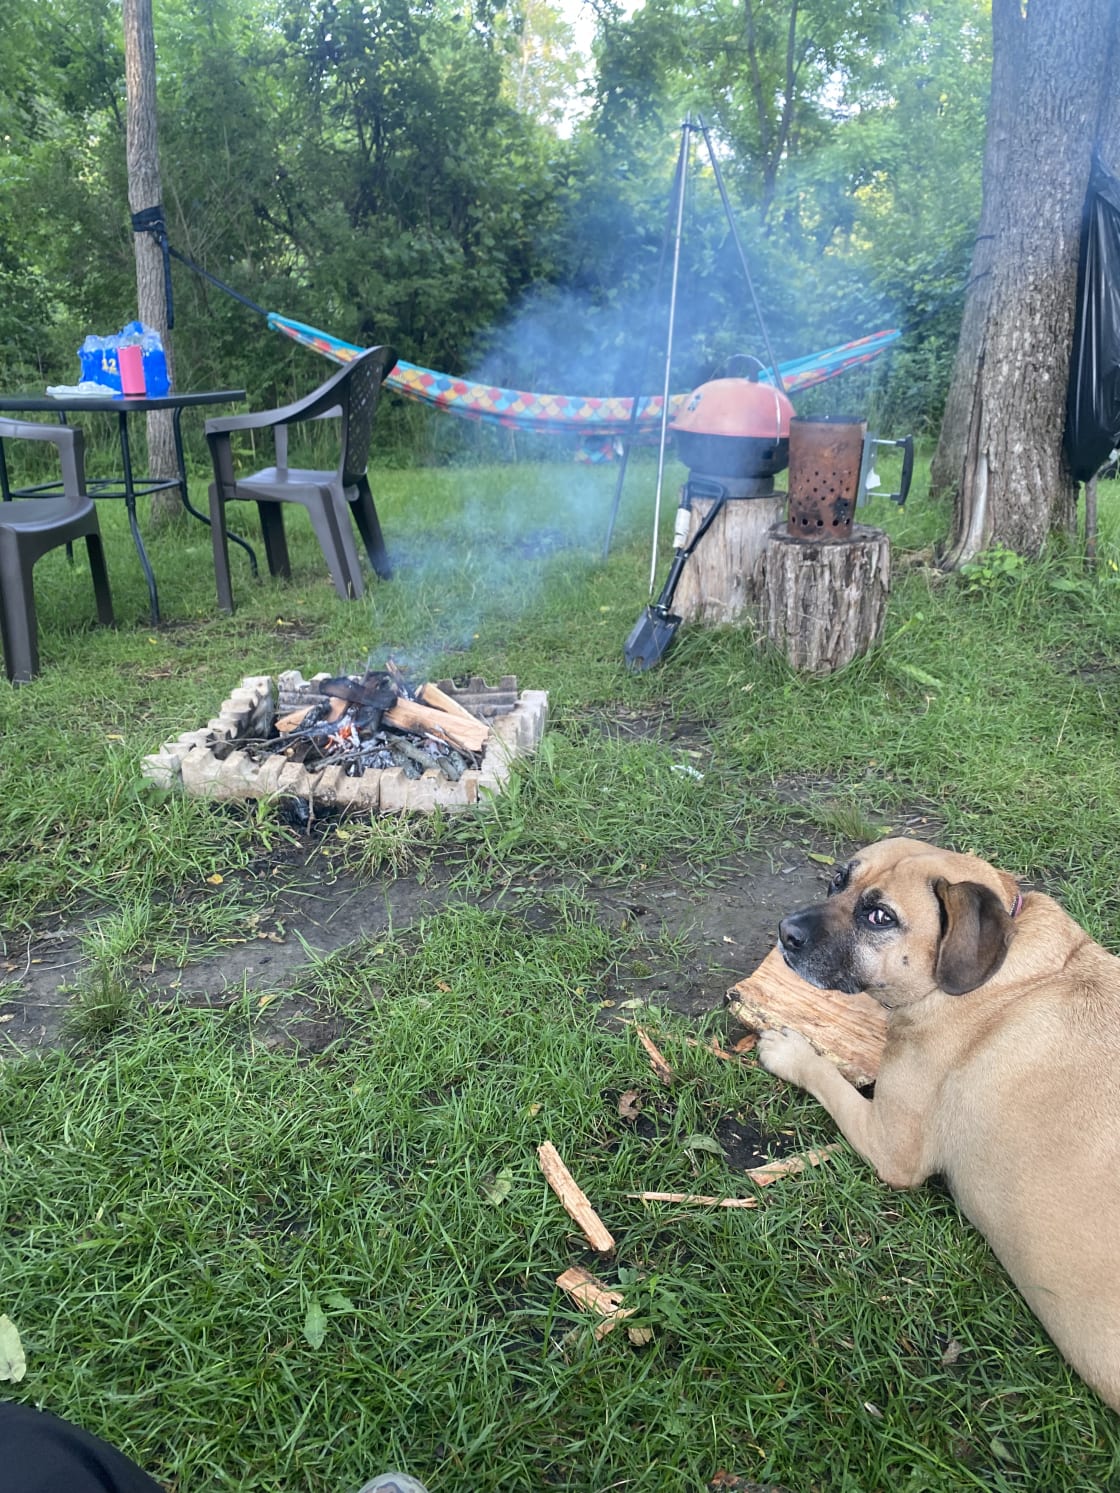 Our dog Hope loves camping with us and she loved this place. 